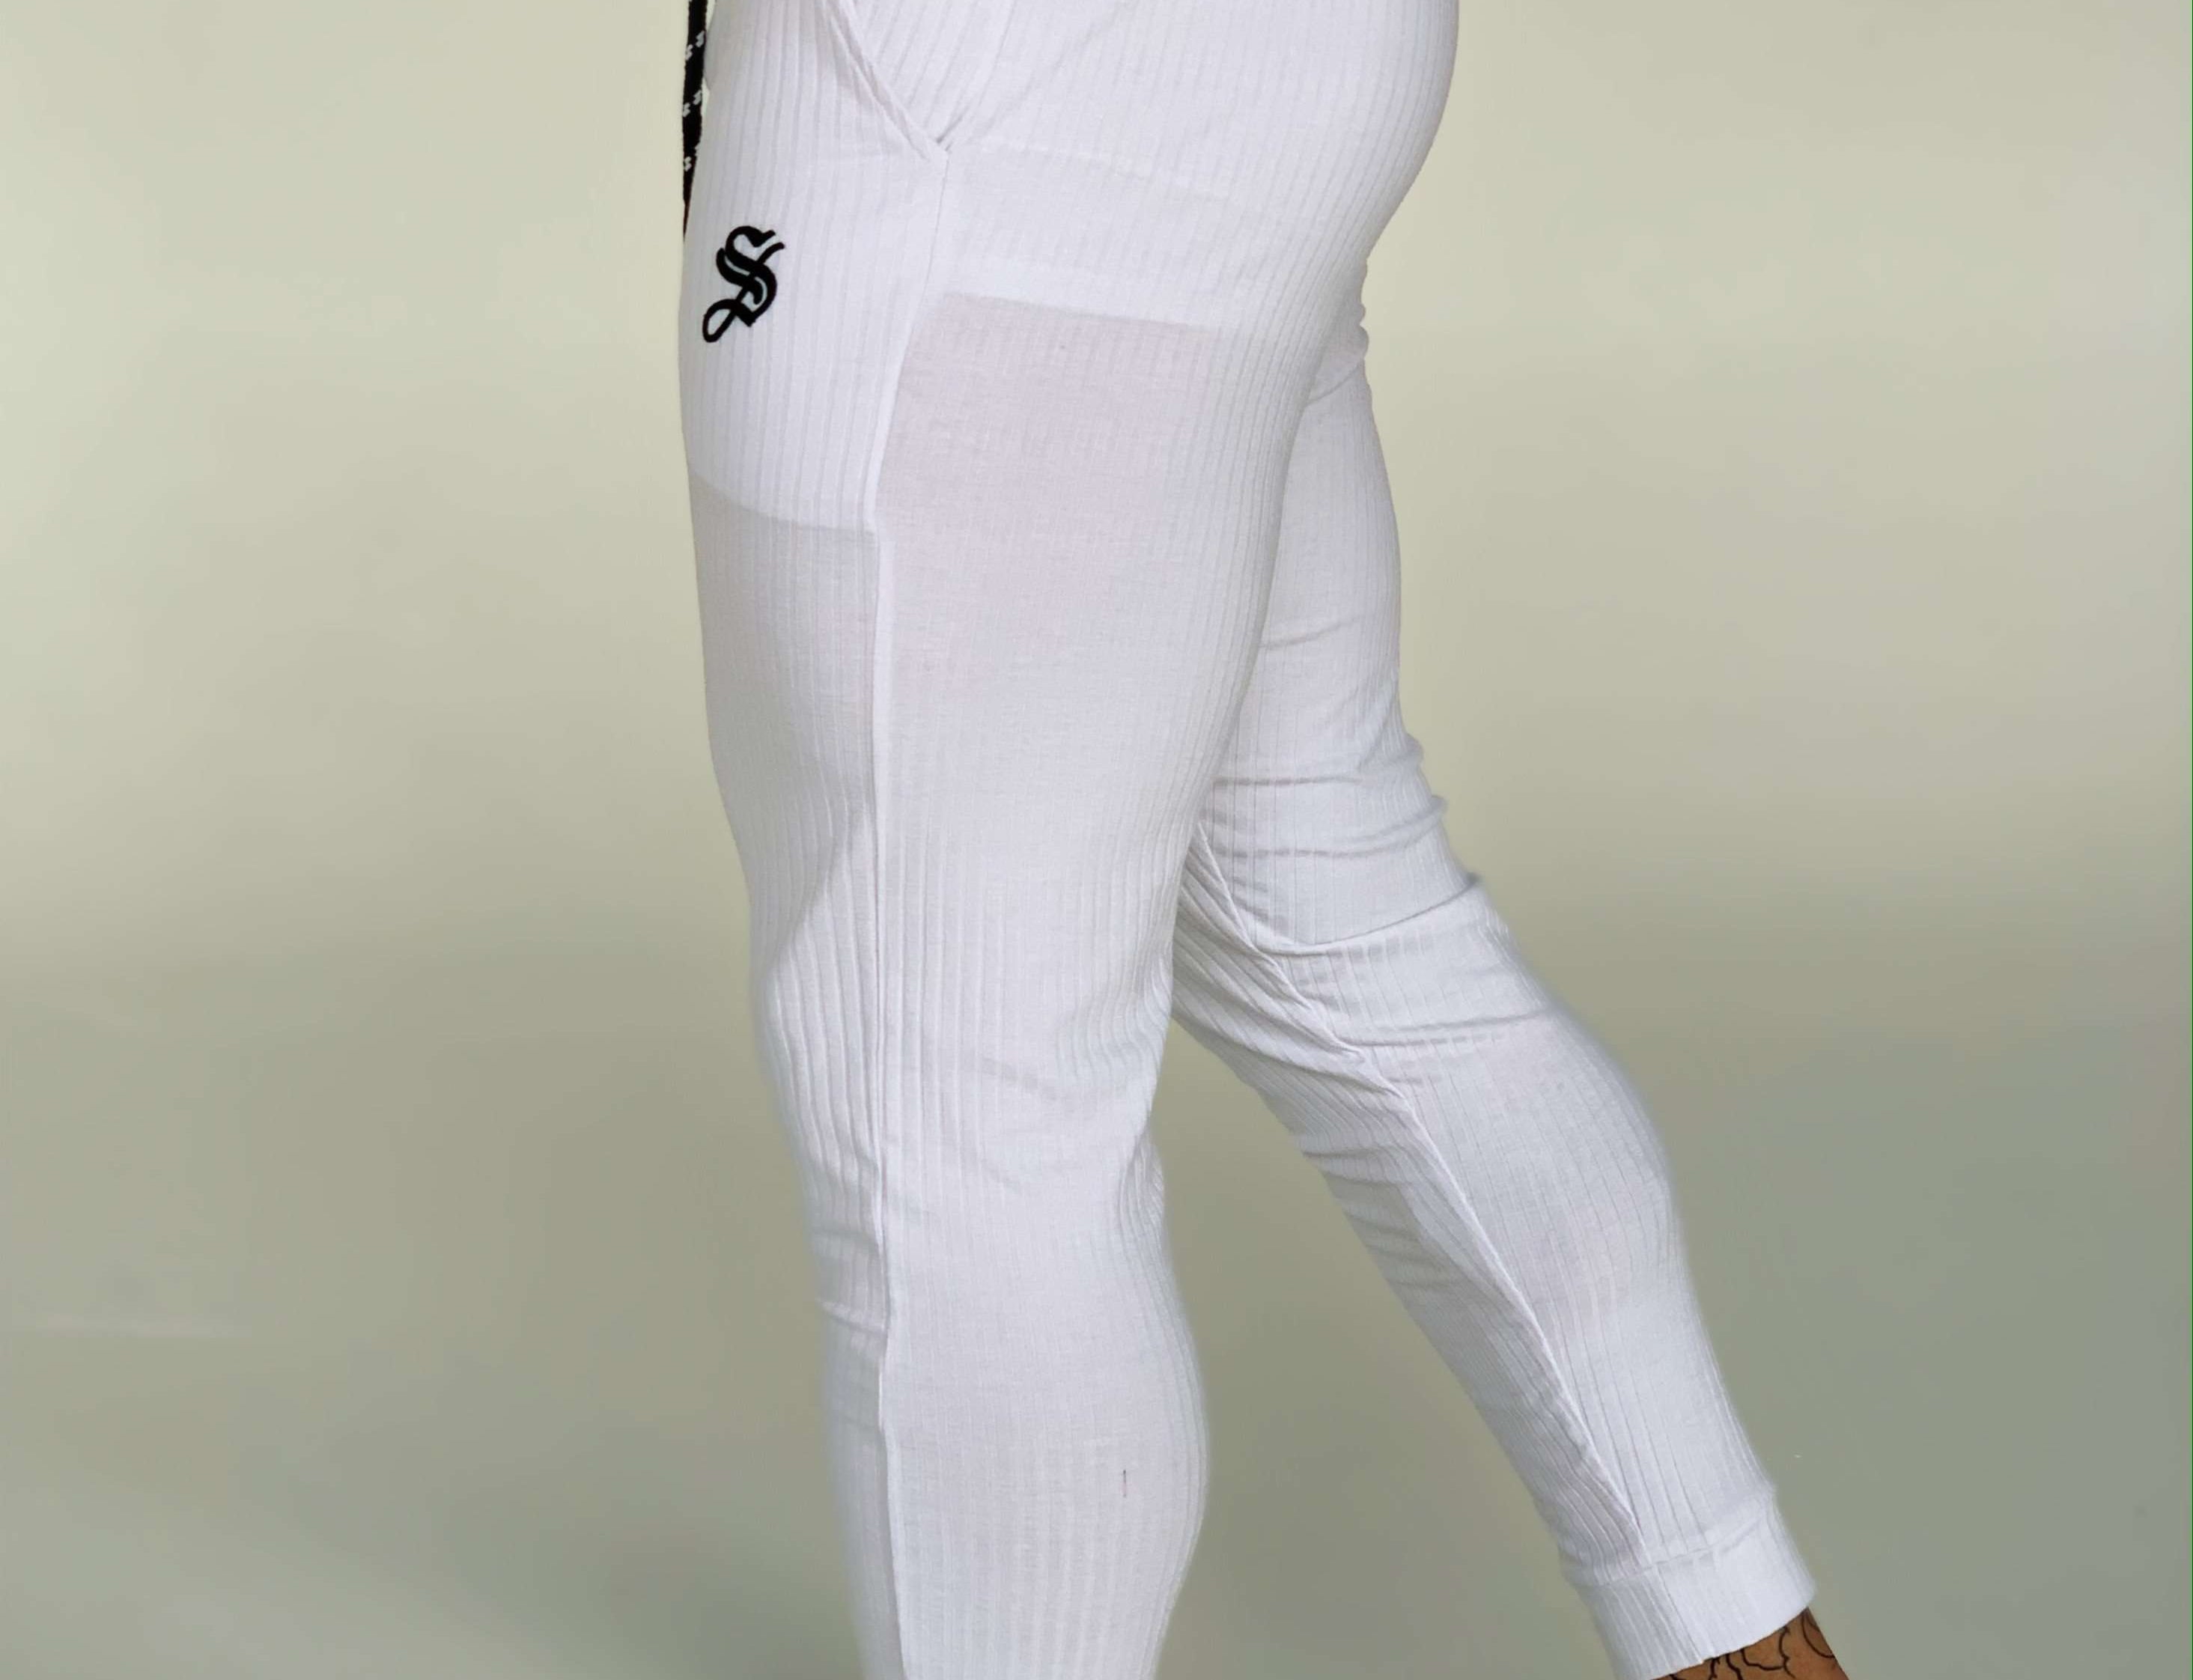 Mendoza - White Joggers for Men (PRE-ORDER DISPATCH DATE 1 JUIN 2021) - Sarman Fashion - Wholesale Clothing Fashion Brand for Men from Canada